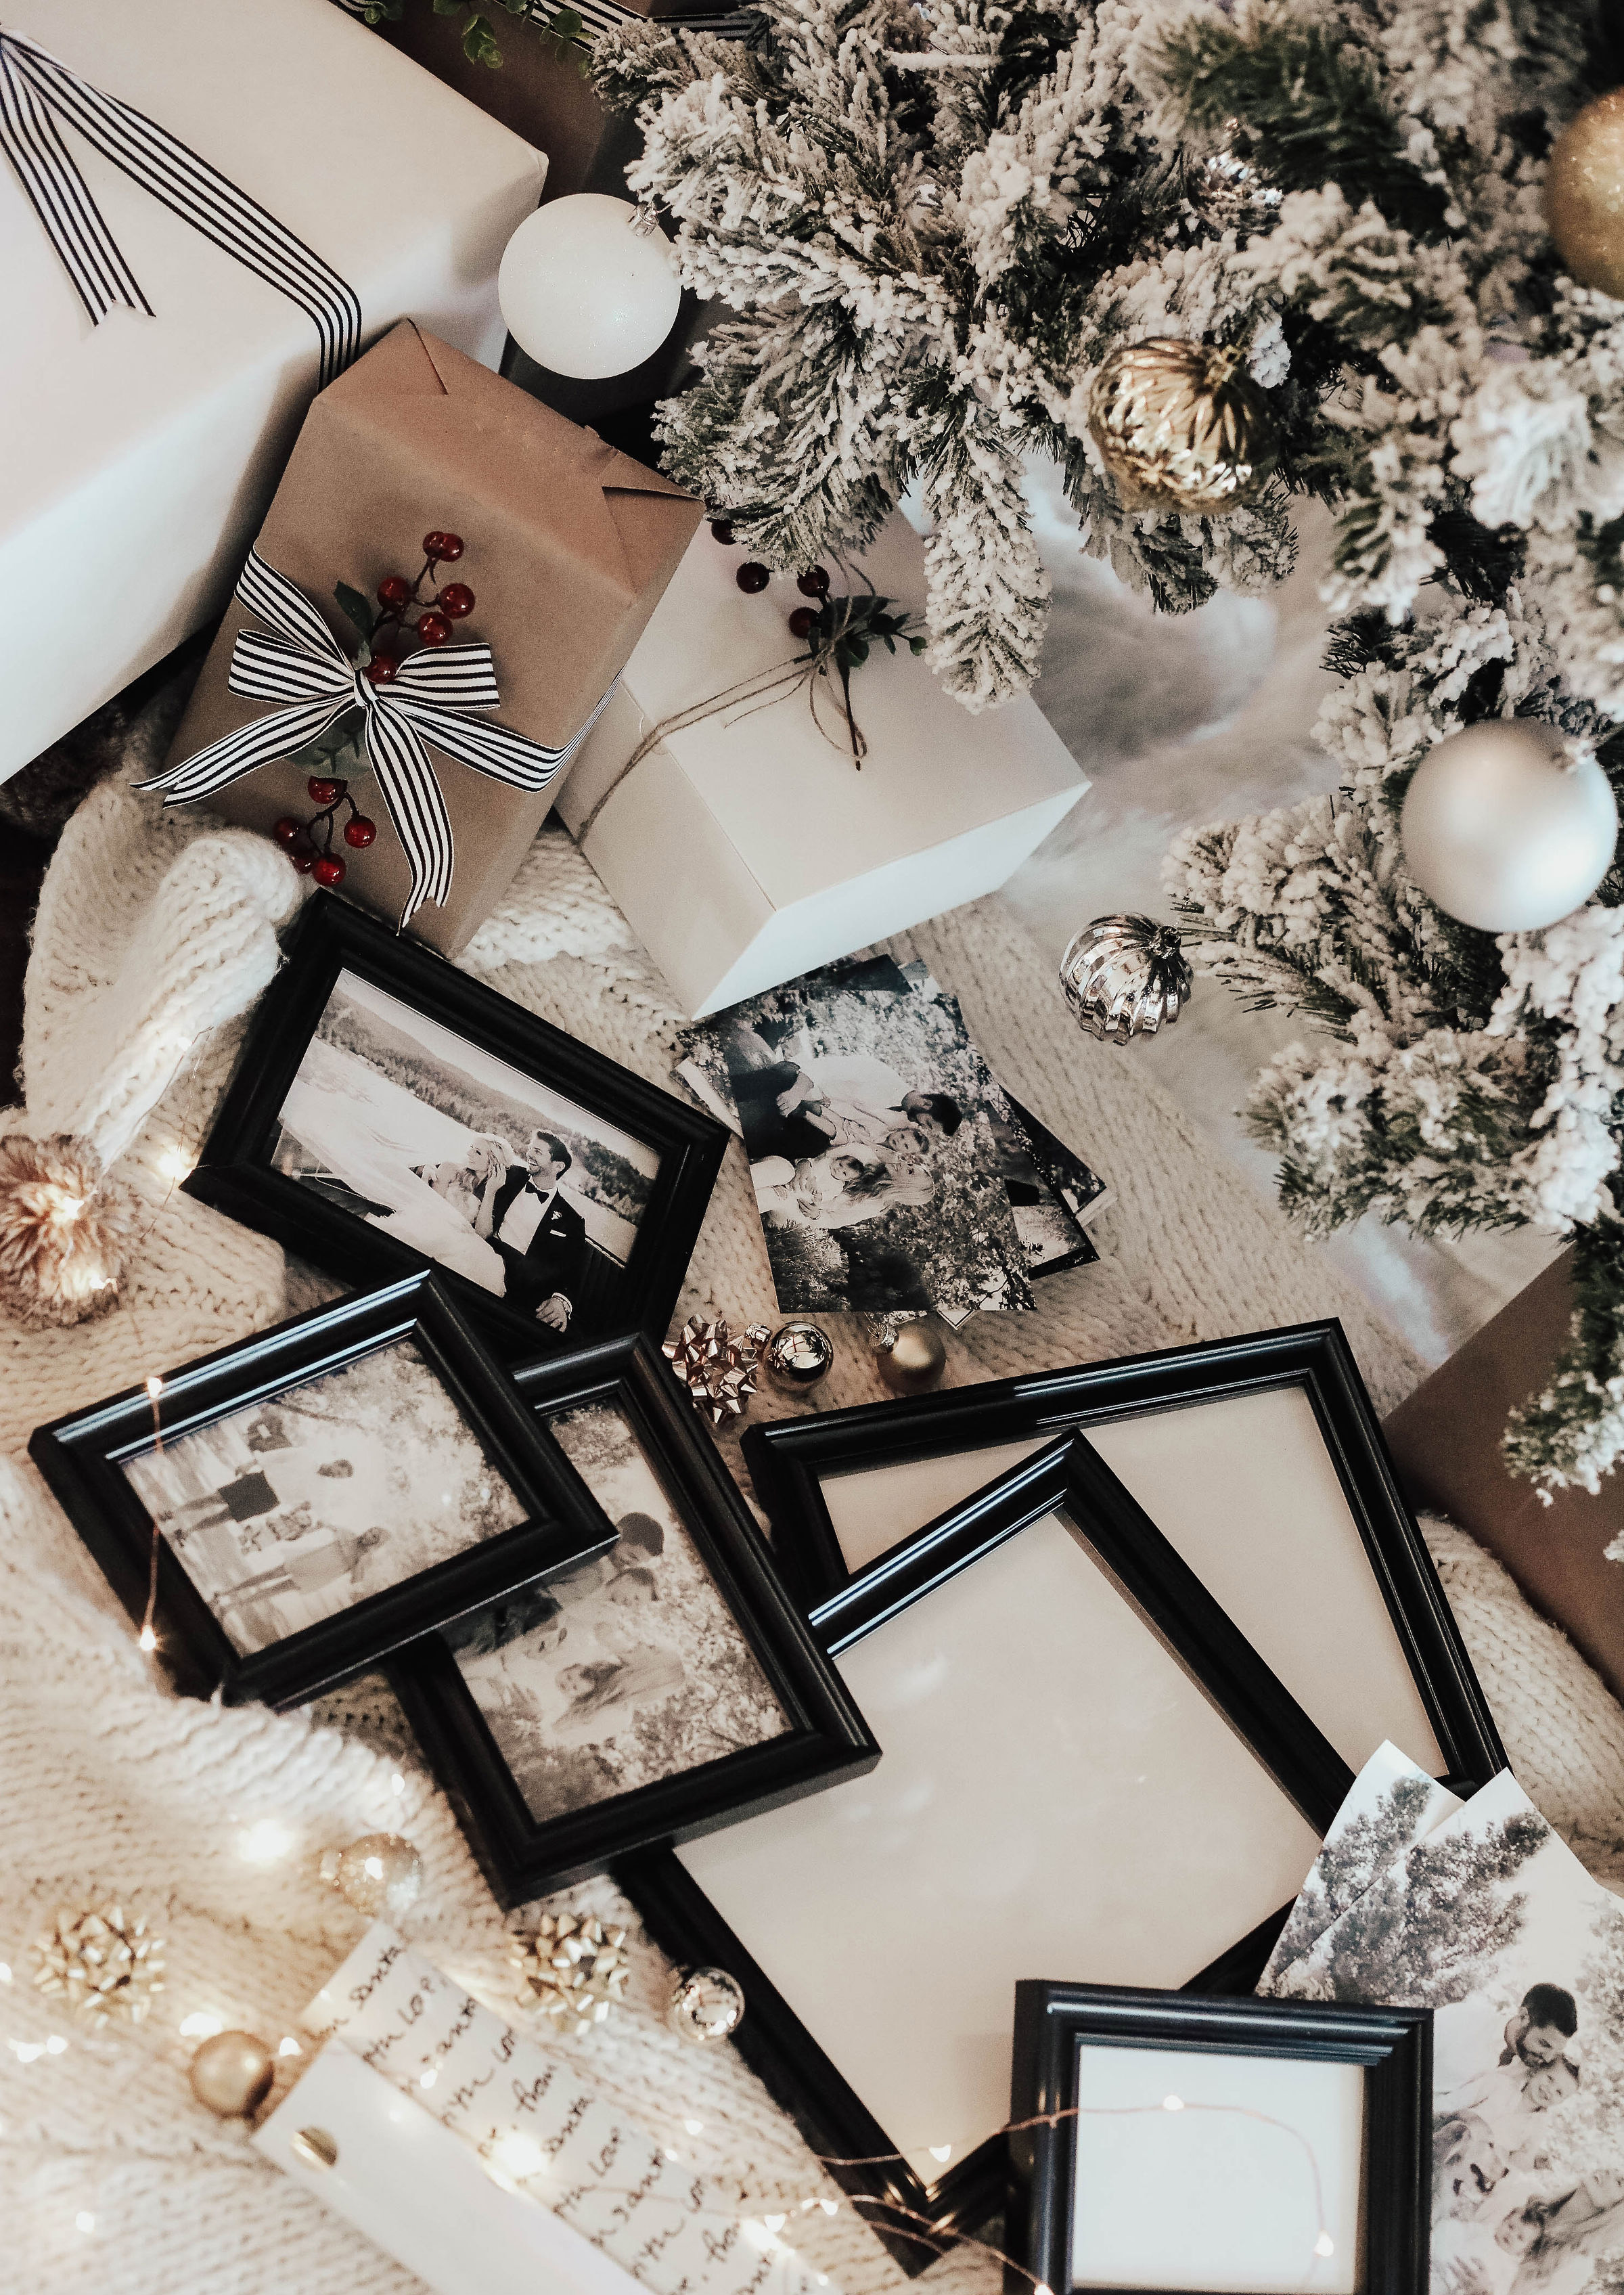 Reno Nevada blogger, Emily Farren Wieczorek shares how she makes personal holiday photo gifts for under $10 each with the help of Walmart.